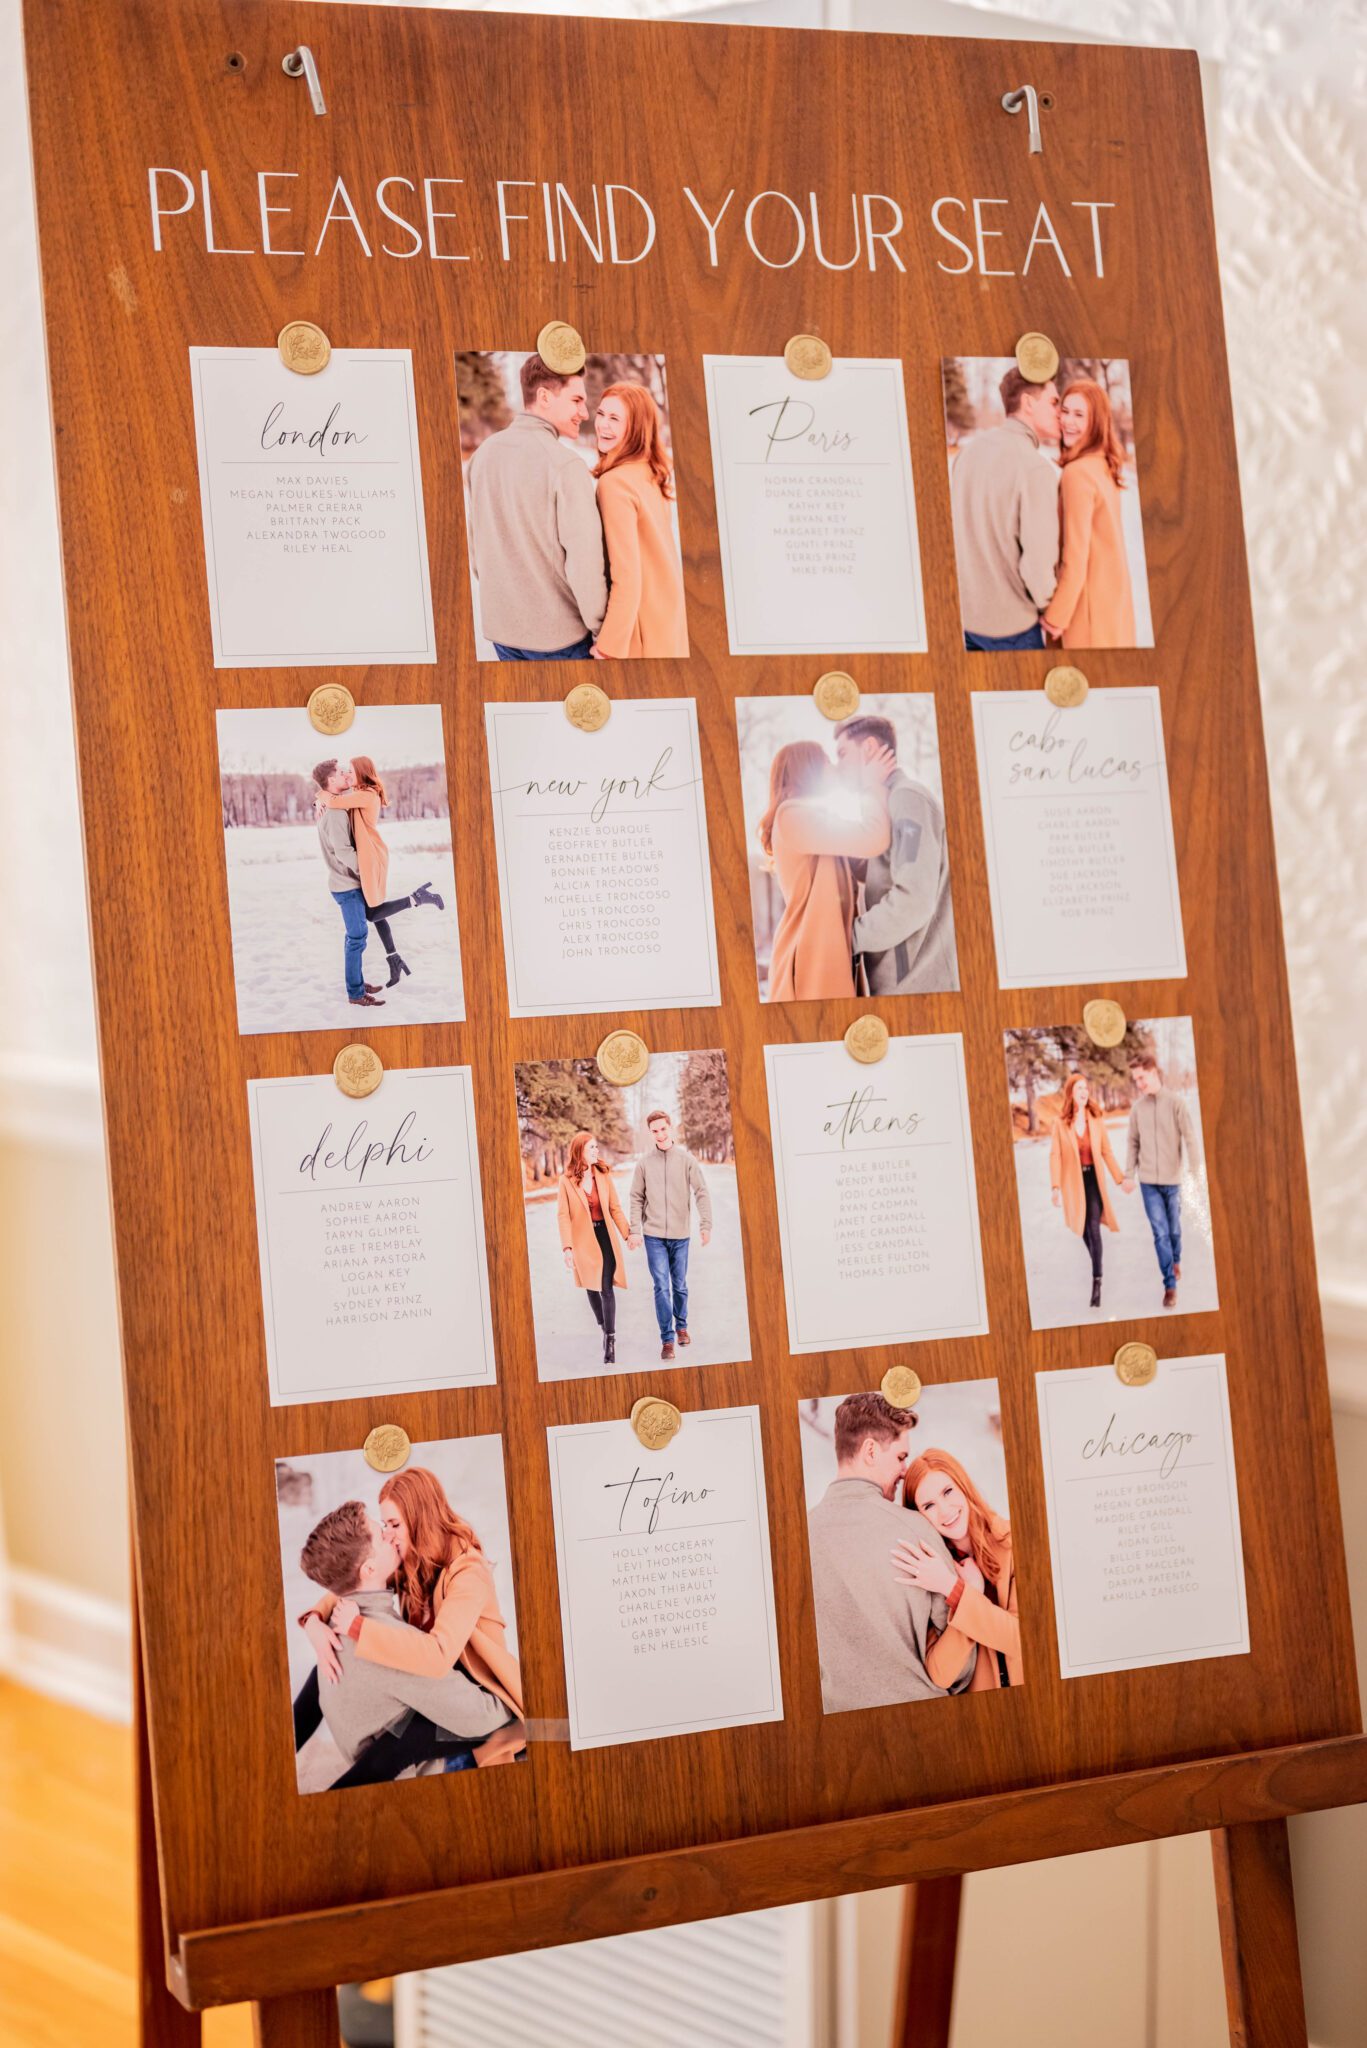 Custom and creative seating chart inspiration with couple's engagement portraits.